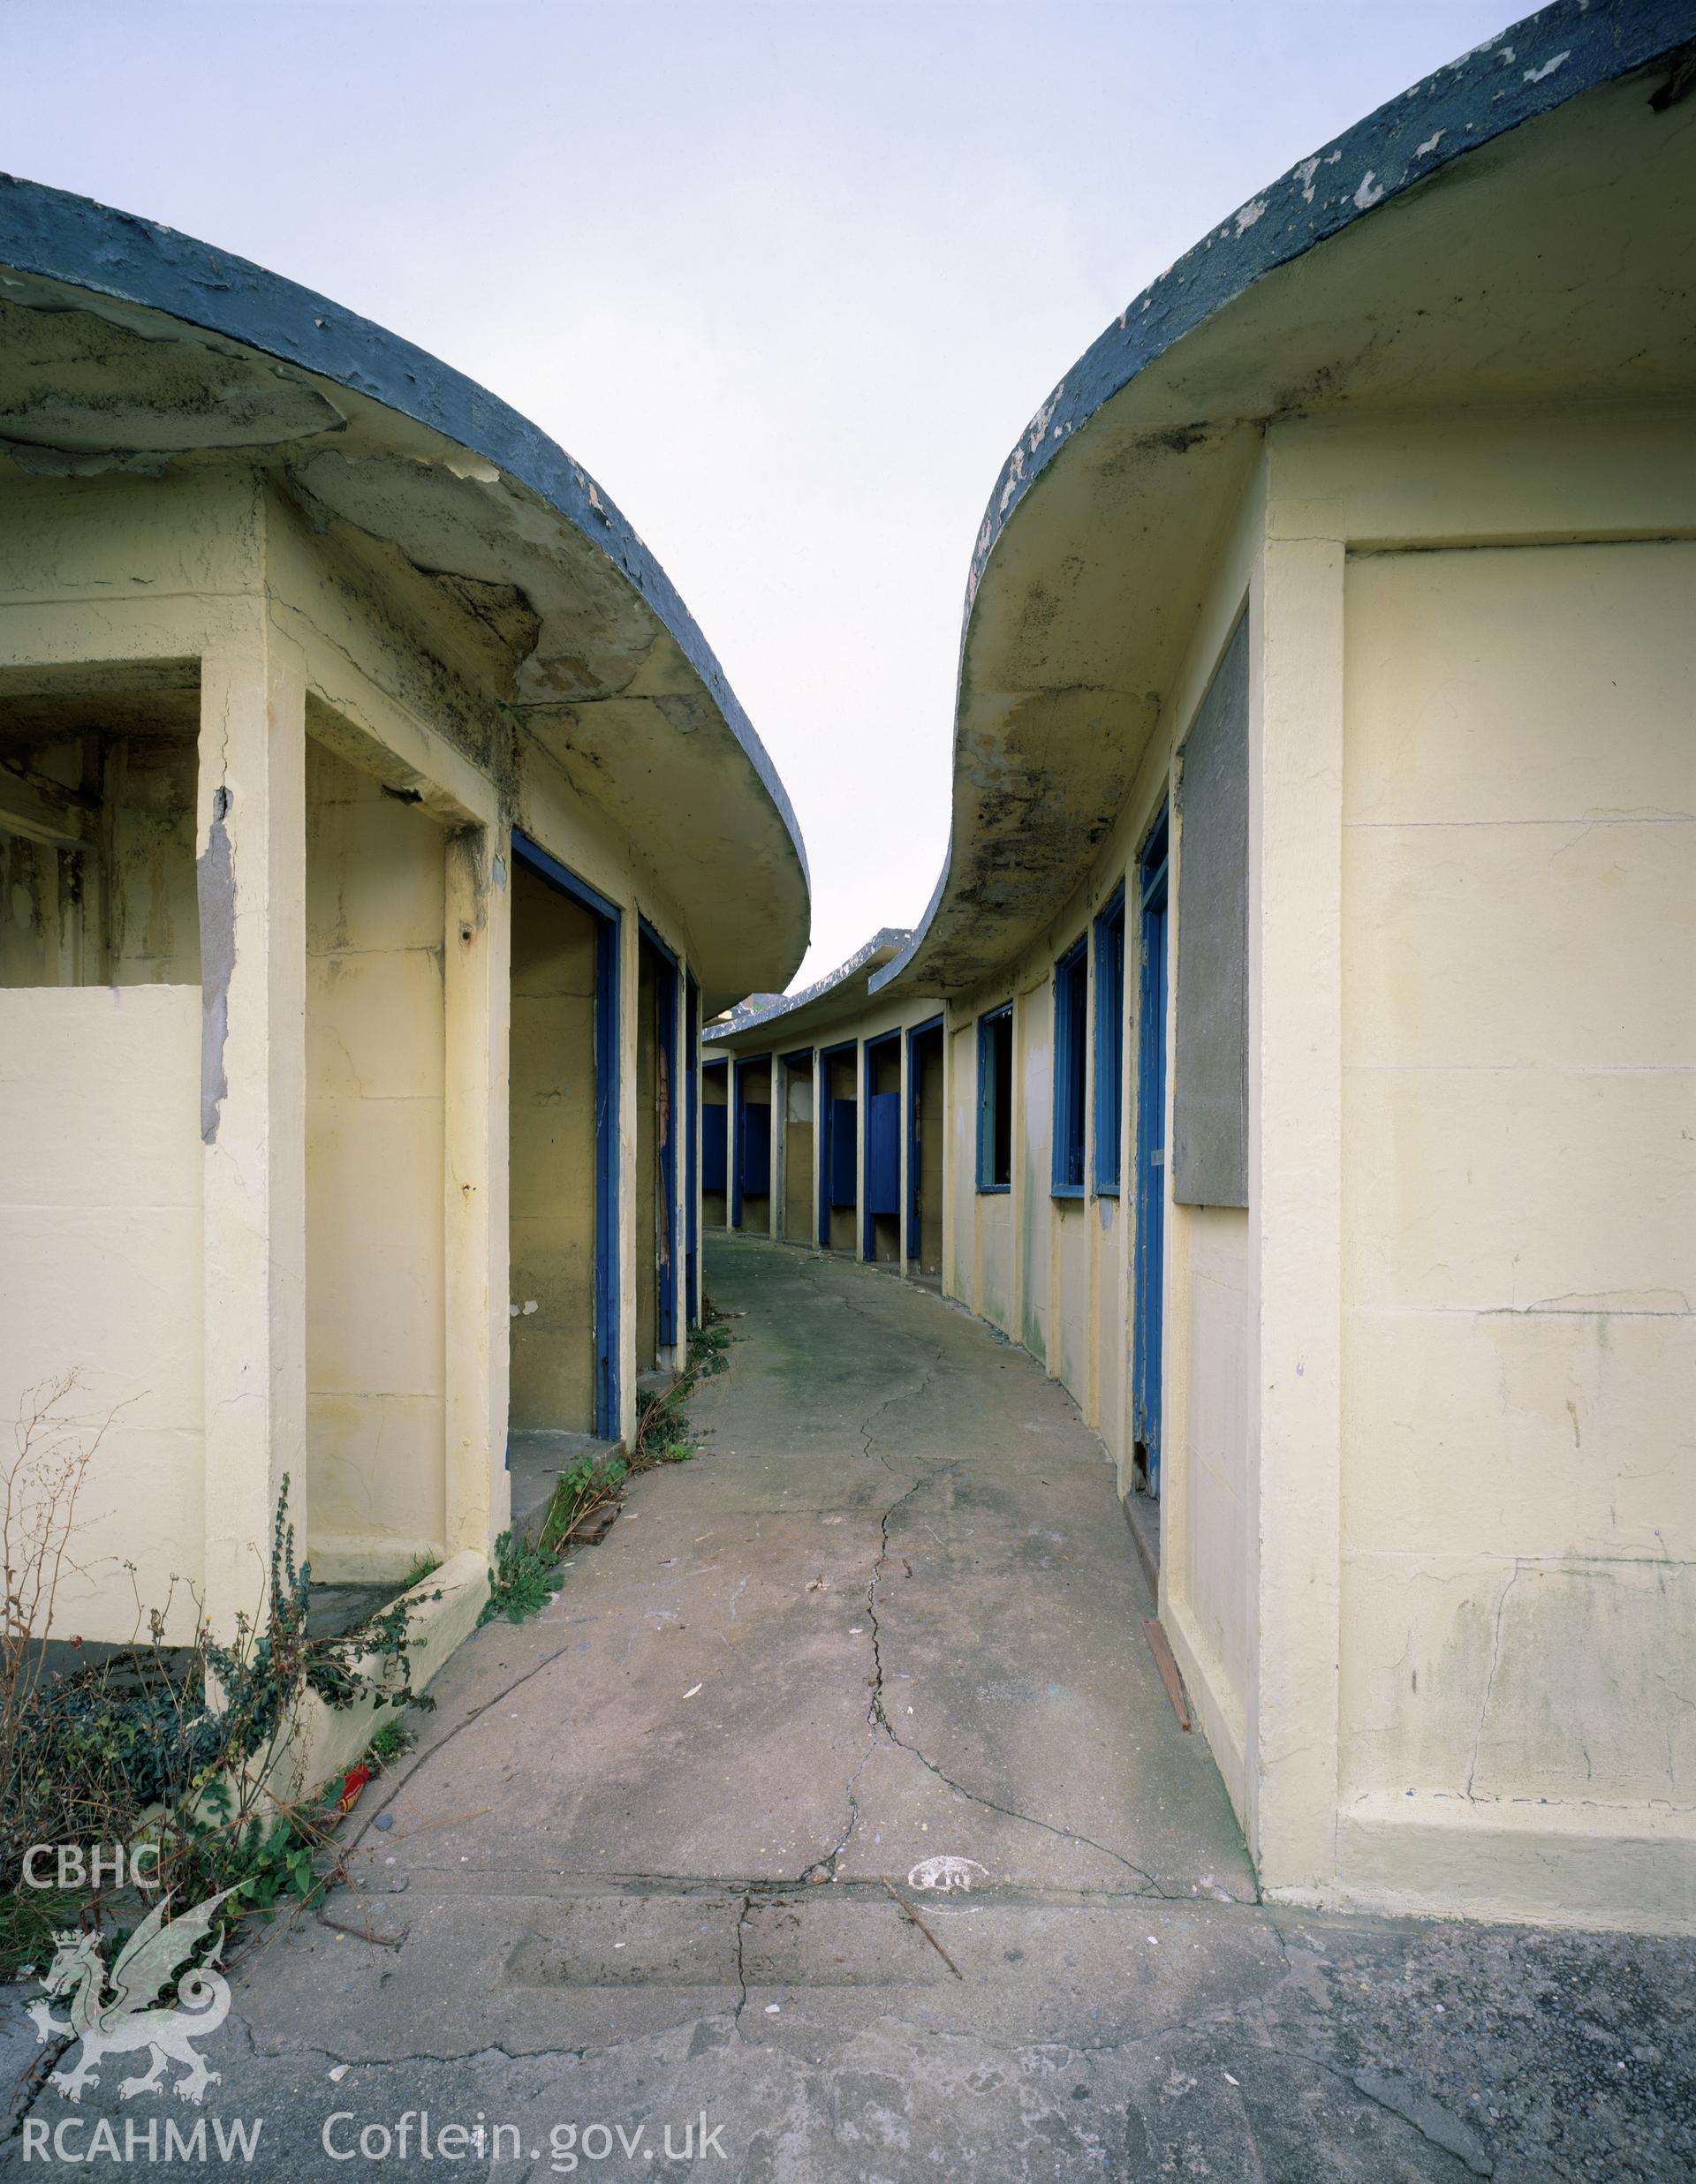 RCAHMW colour transparency showing view of the passageway between the changing cubicles at Cold Knap Lido, Barry.